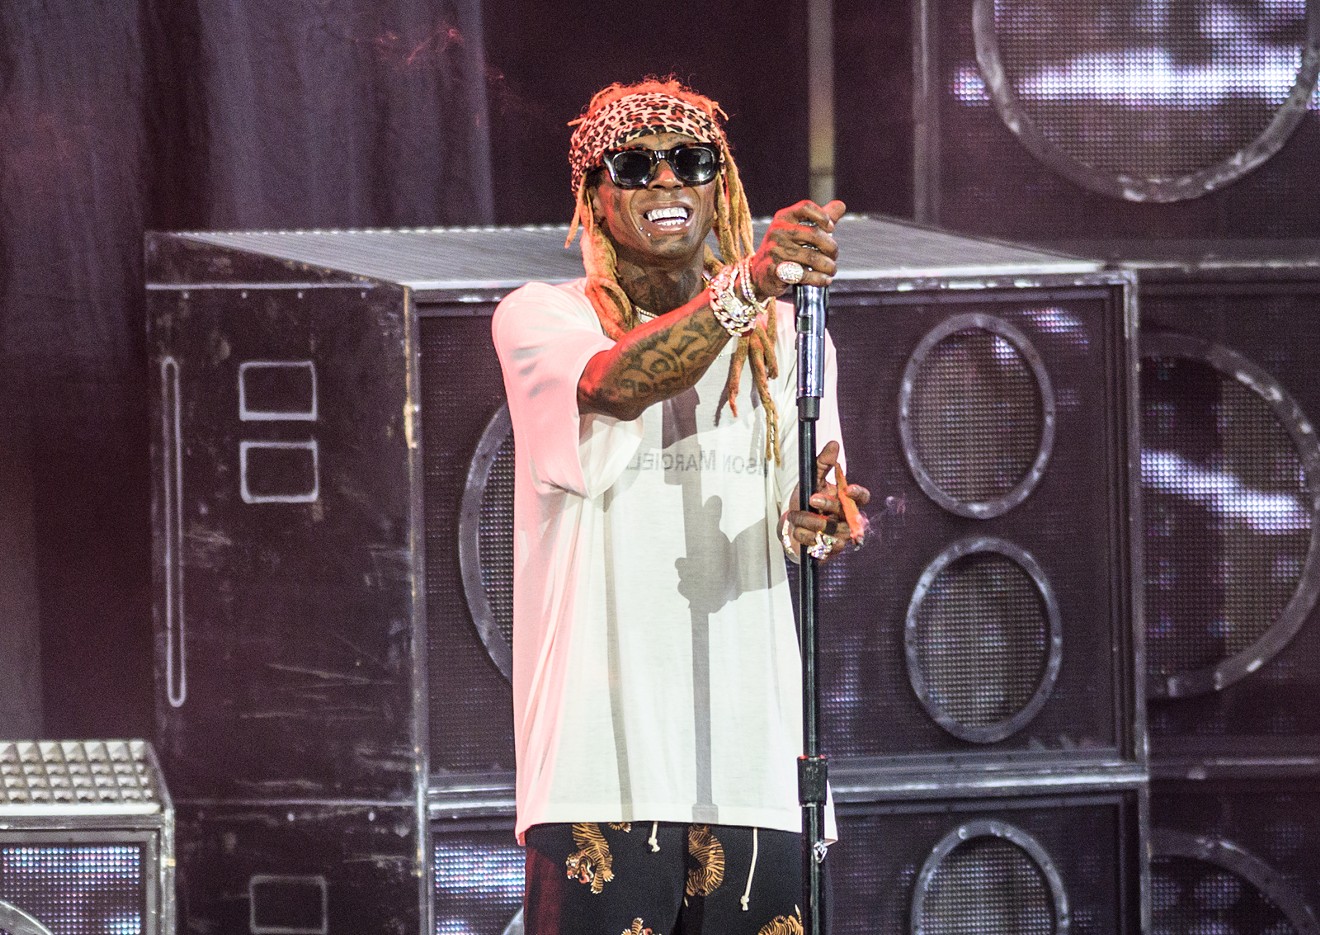 Weezy was feeling the Dallas crowd. At least he didn't cut his set in half.